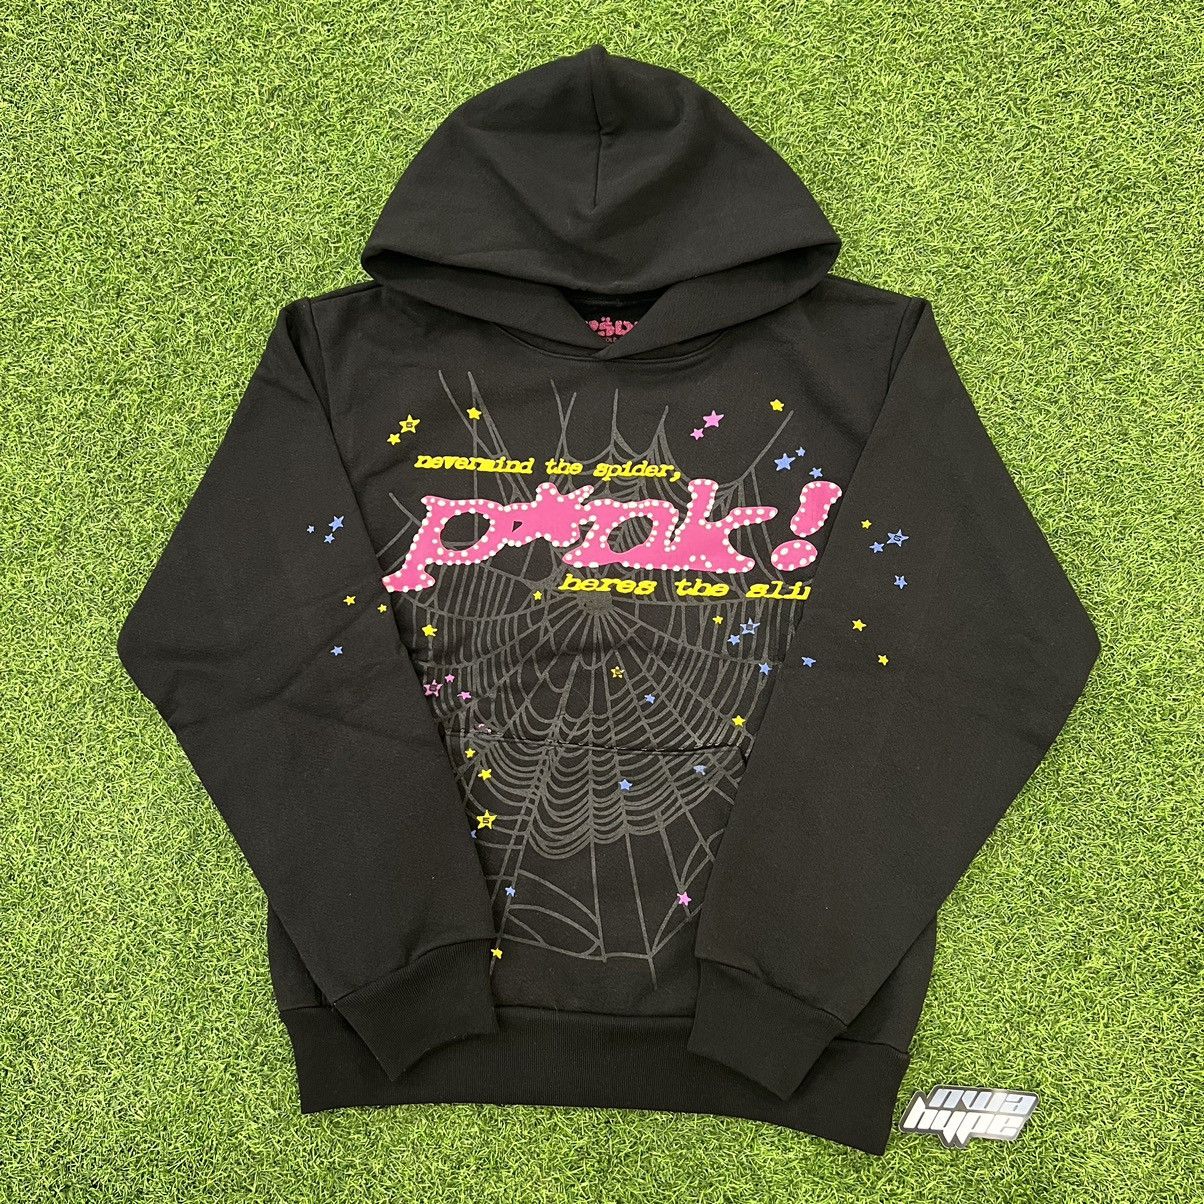 Young Thug Spider worldwide P*nk Hoodie Black M Size US M / EU 48-50 / 2 - 1 Preview